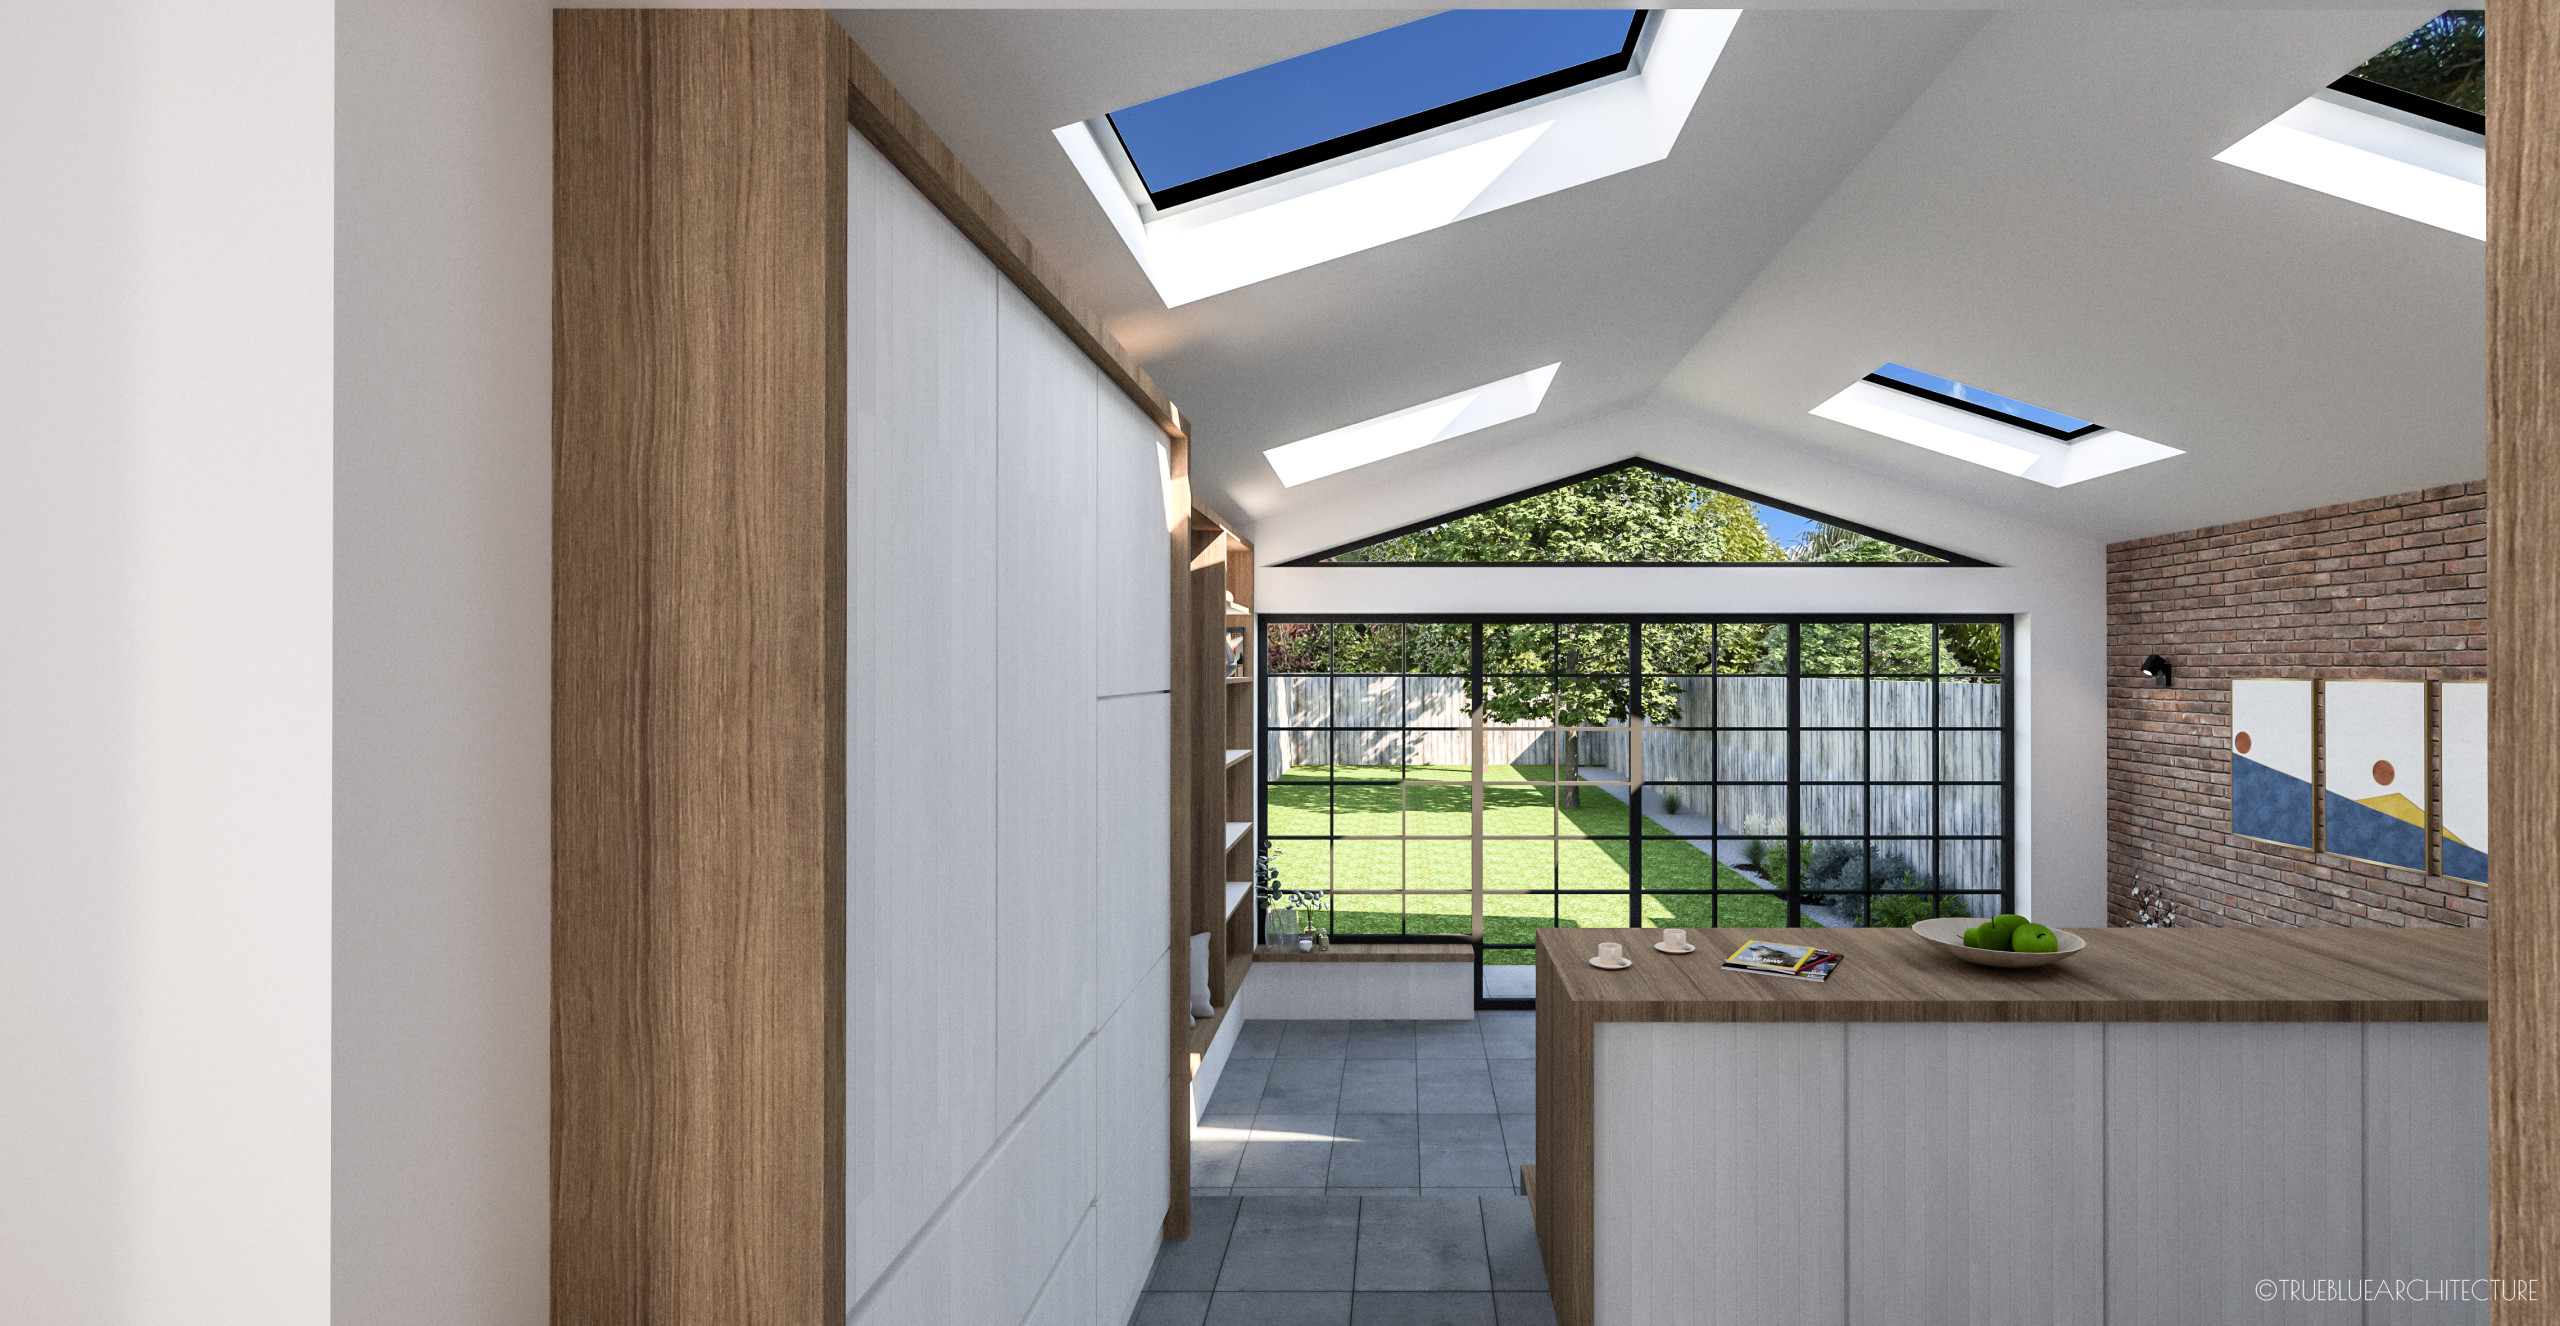 Iffley, Oxford - Rear Extension and Ground Floor Refurbishment